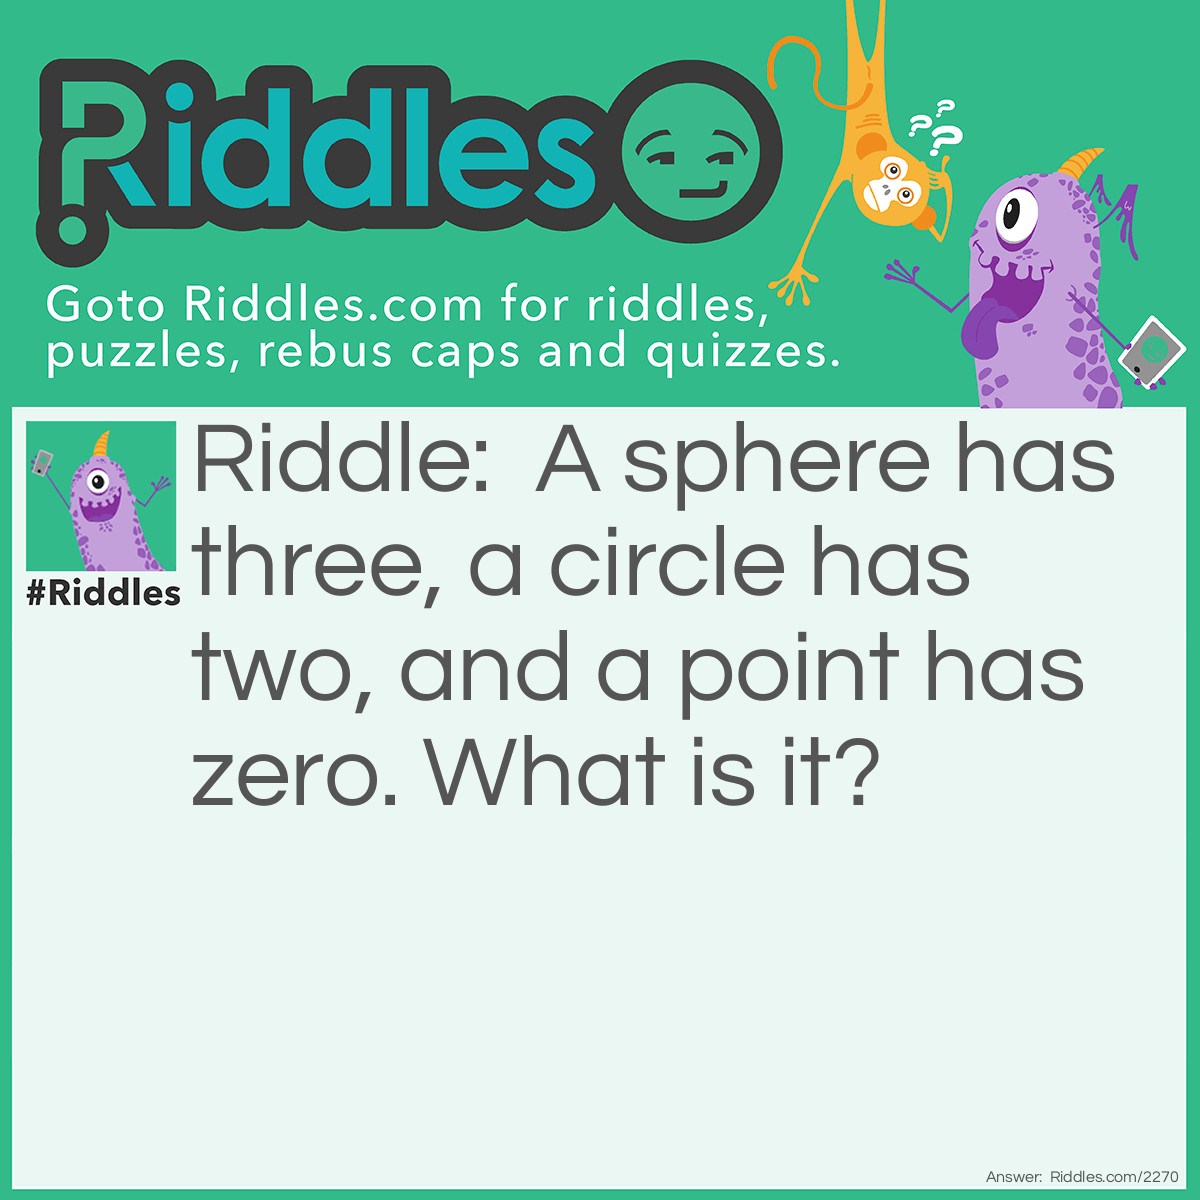 Riddle: A sphere has three, a circle has two, and a point has zero. What is it? Answer: Dimensions.